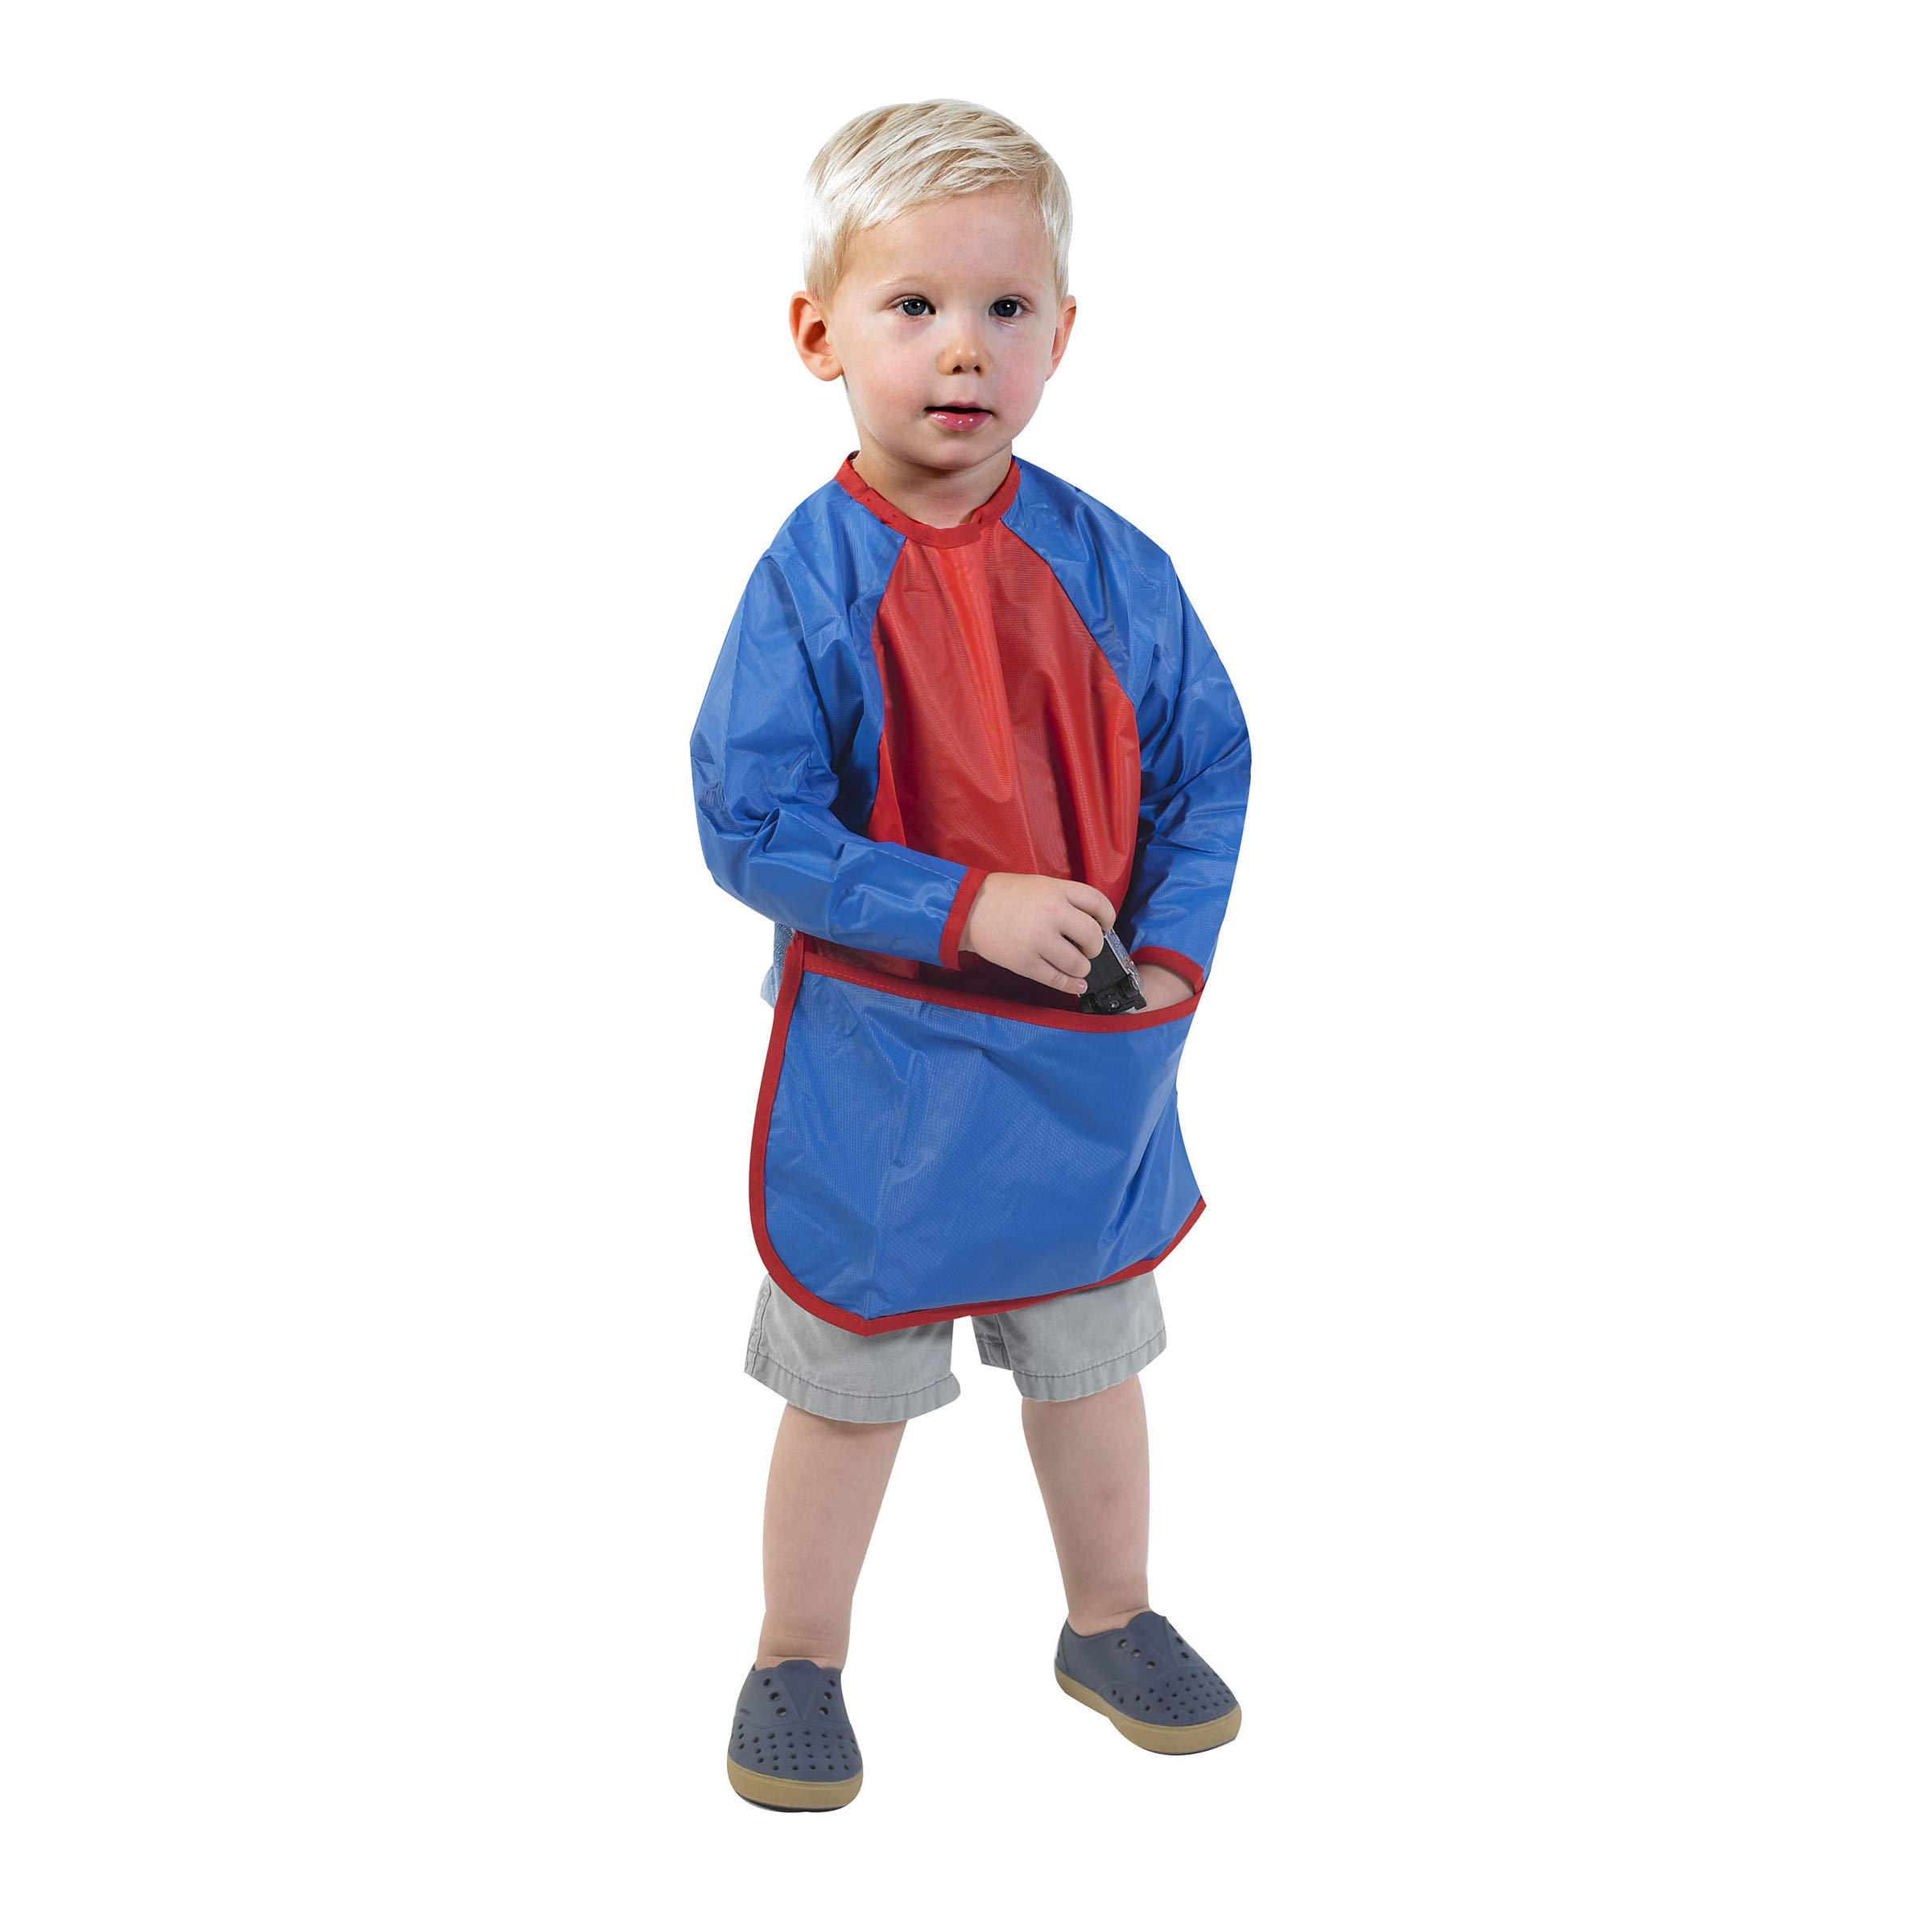 Children's Factory Small Washable Smock, Classroom Painting & Art Smock for Kids & Toddlers, Ideal for Preschools/Homeschools/Playrooms/Daycares